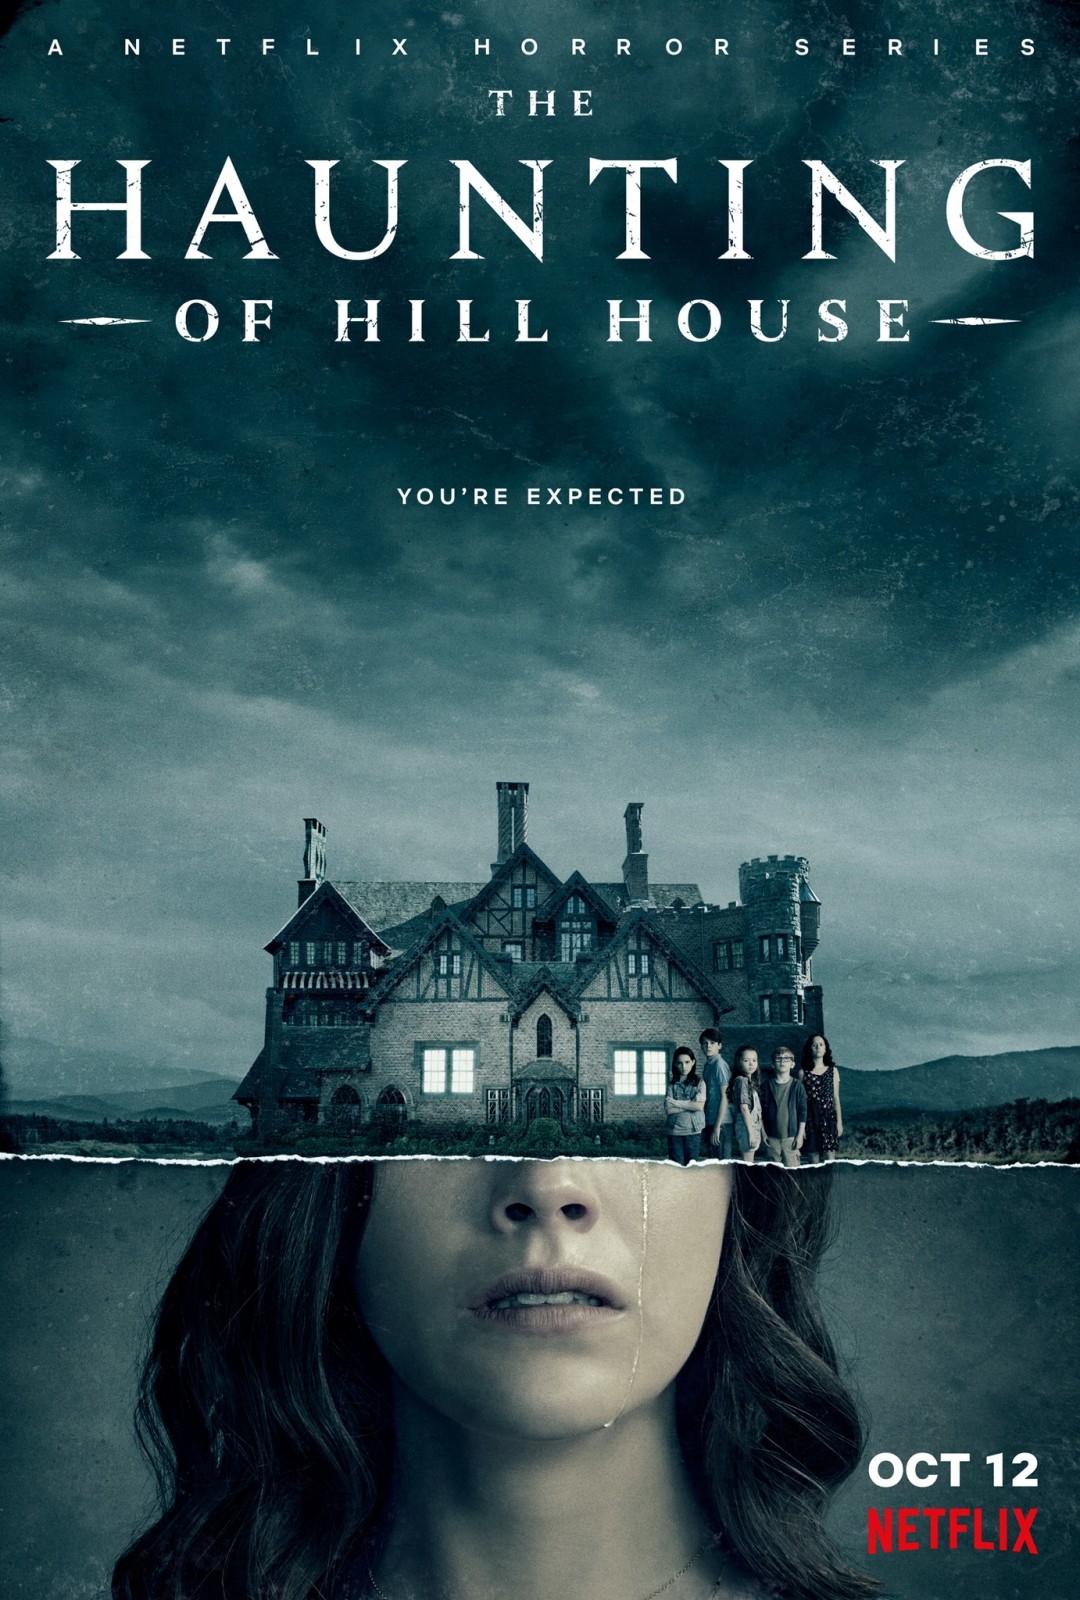 5 TV Shows To Binge Watch This November - The Haunting of Hill House